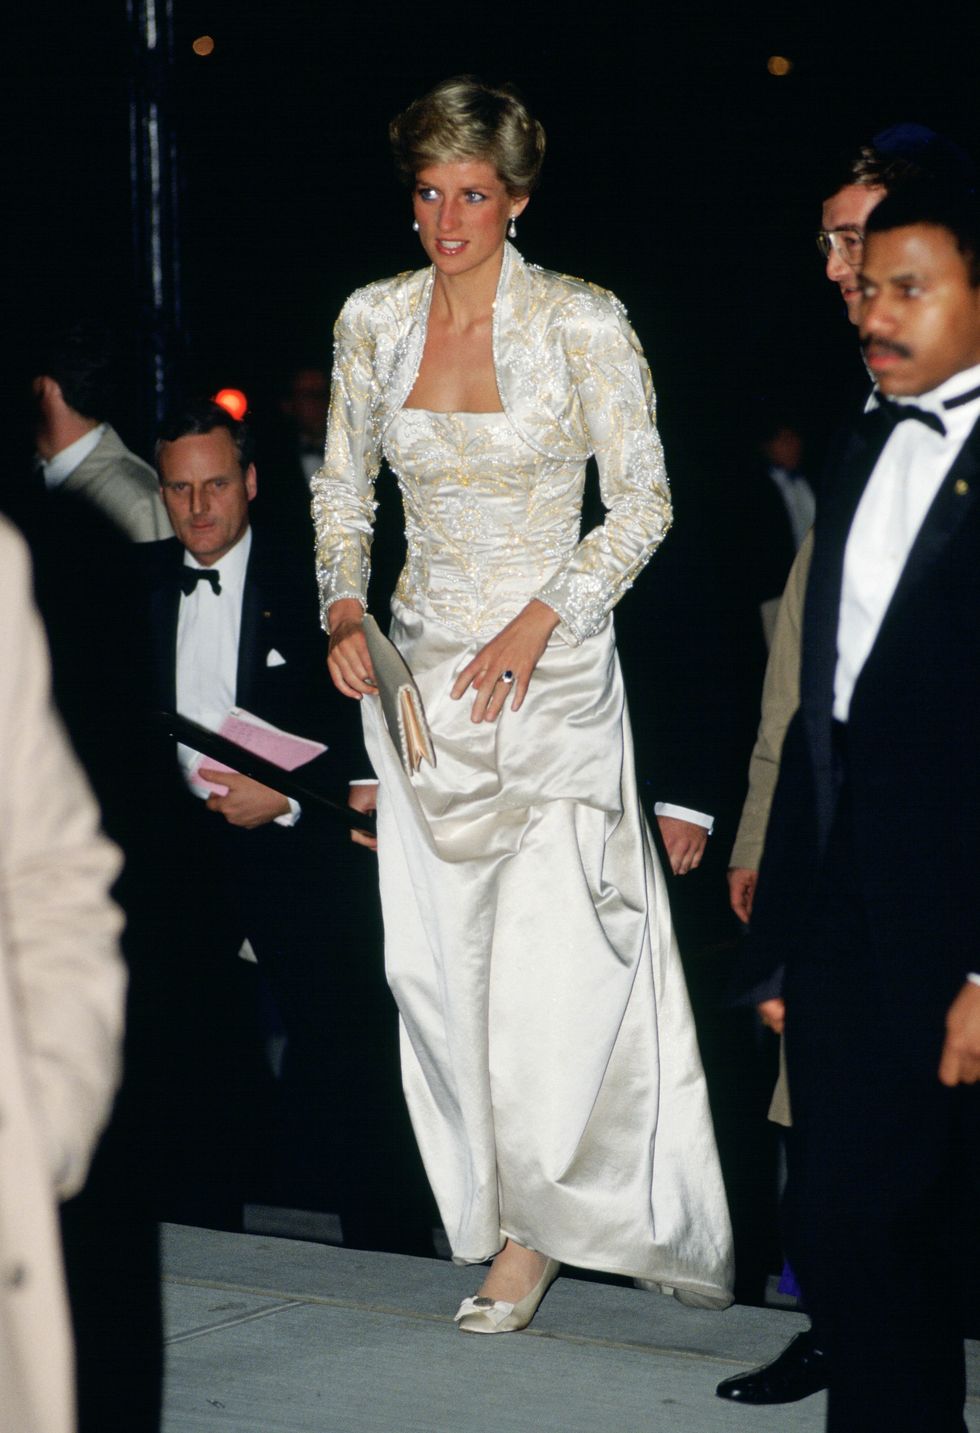 diana, princess of wales wears a dress designed by victor ed